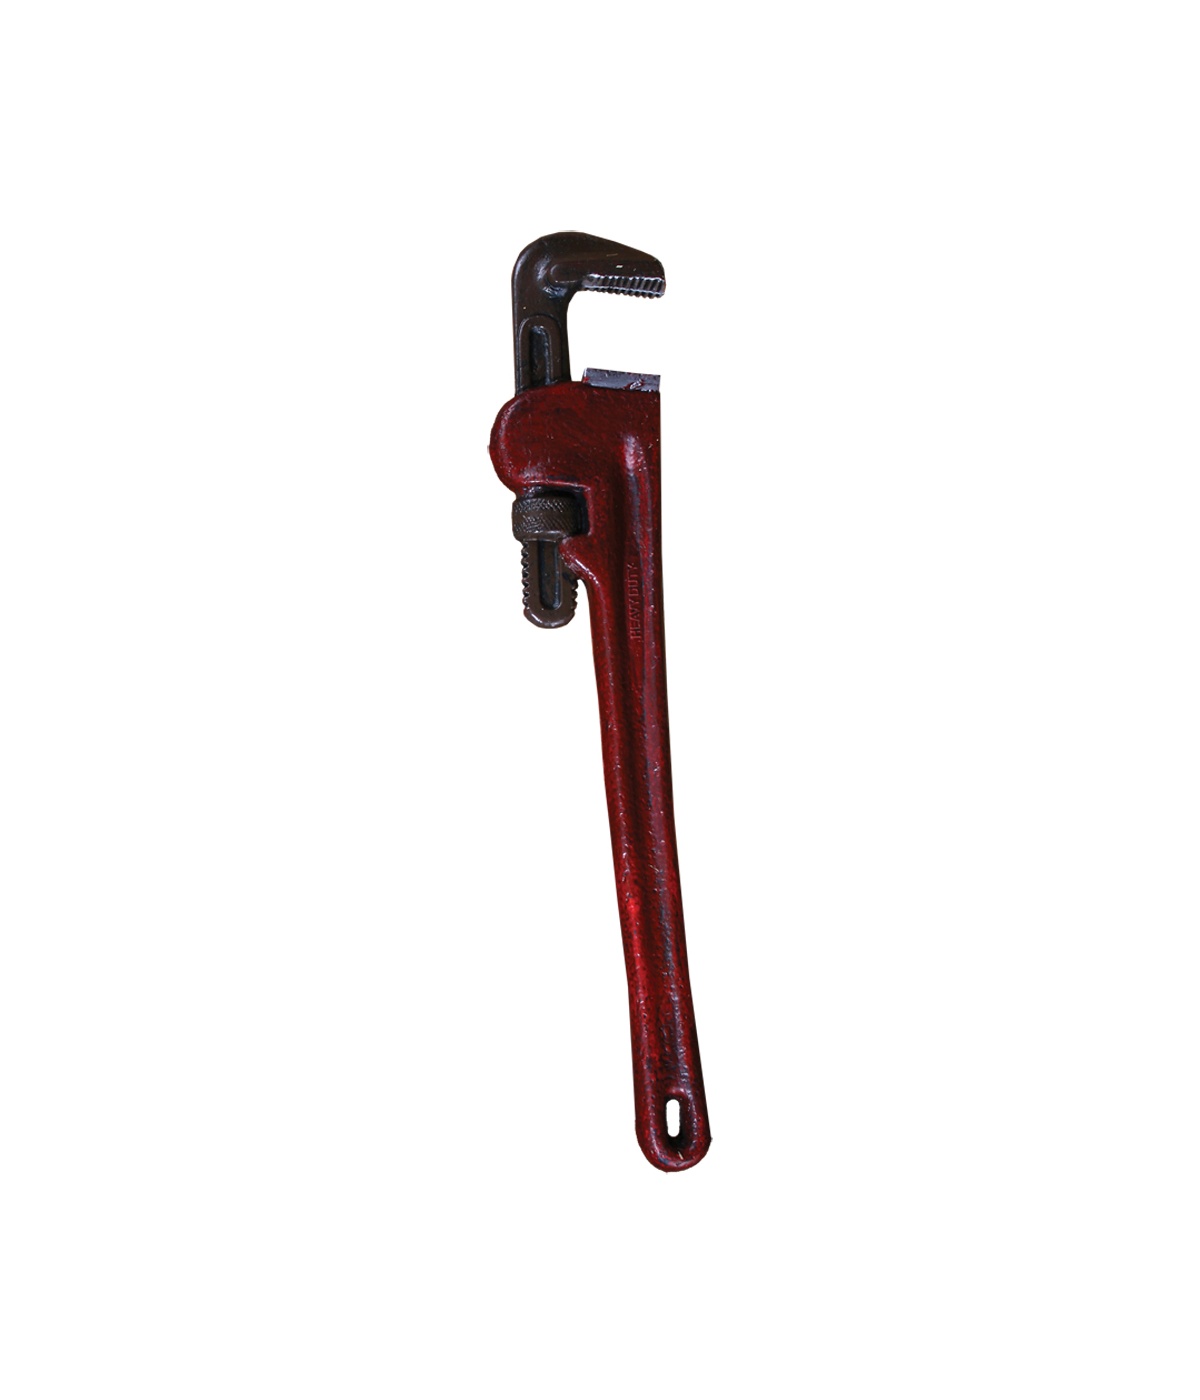  Horror Tools Pipe Wrench